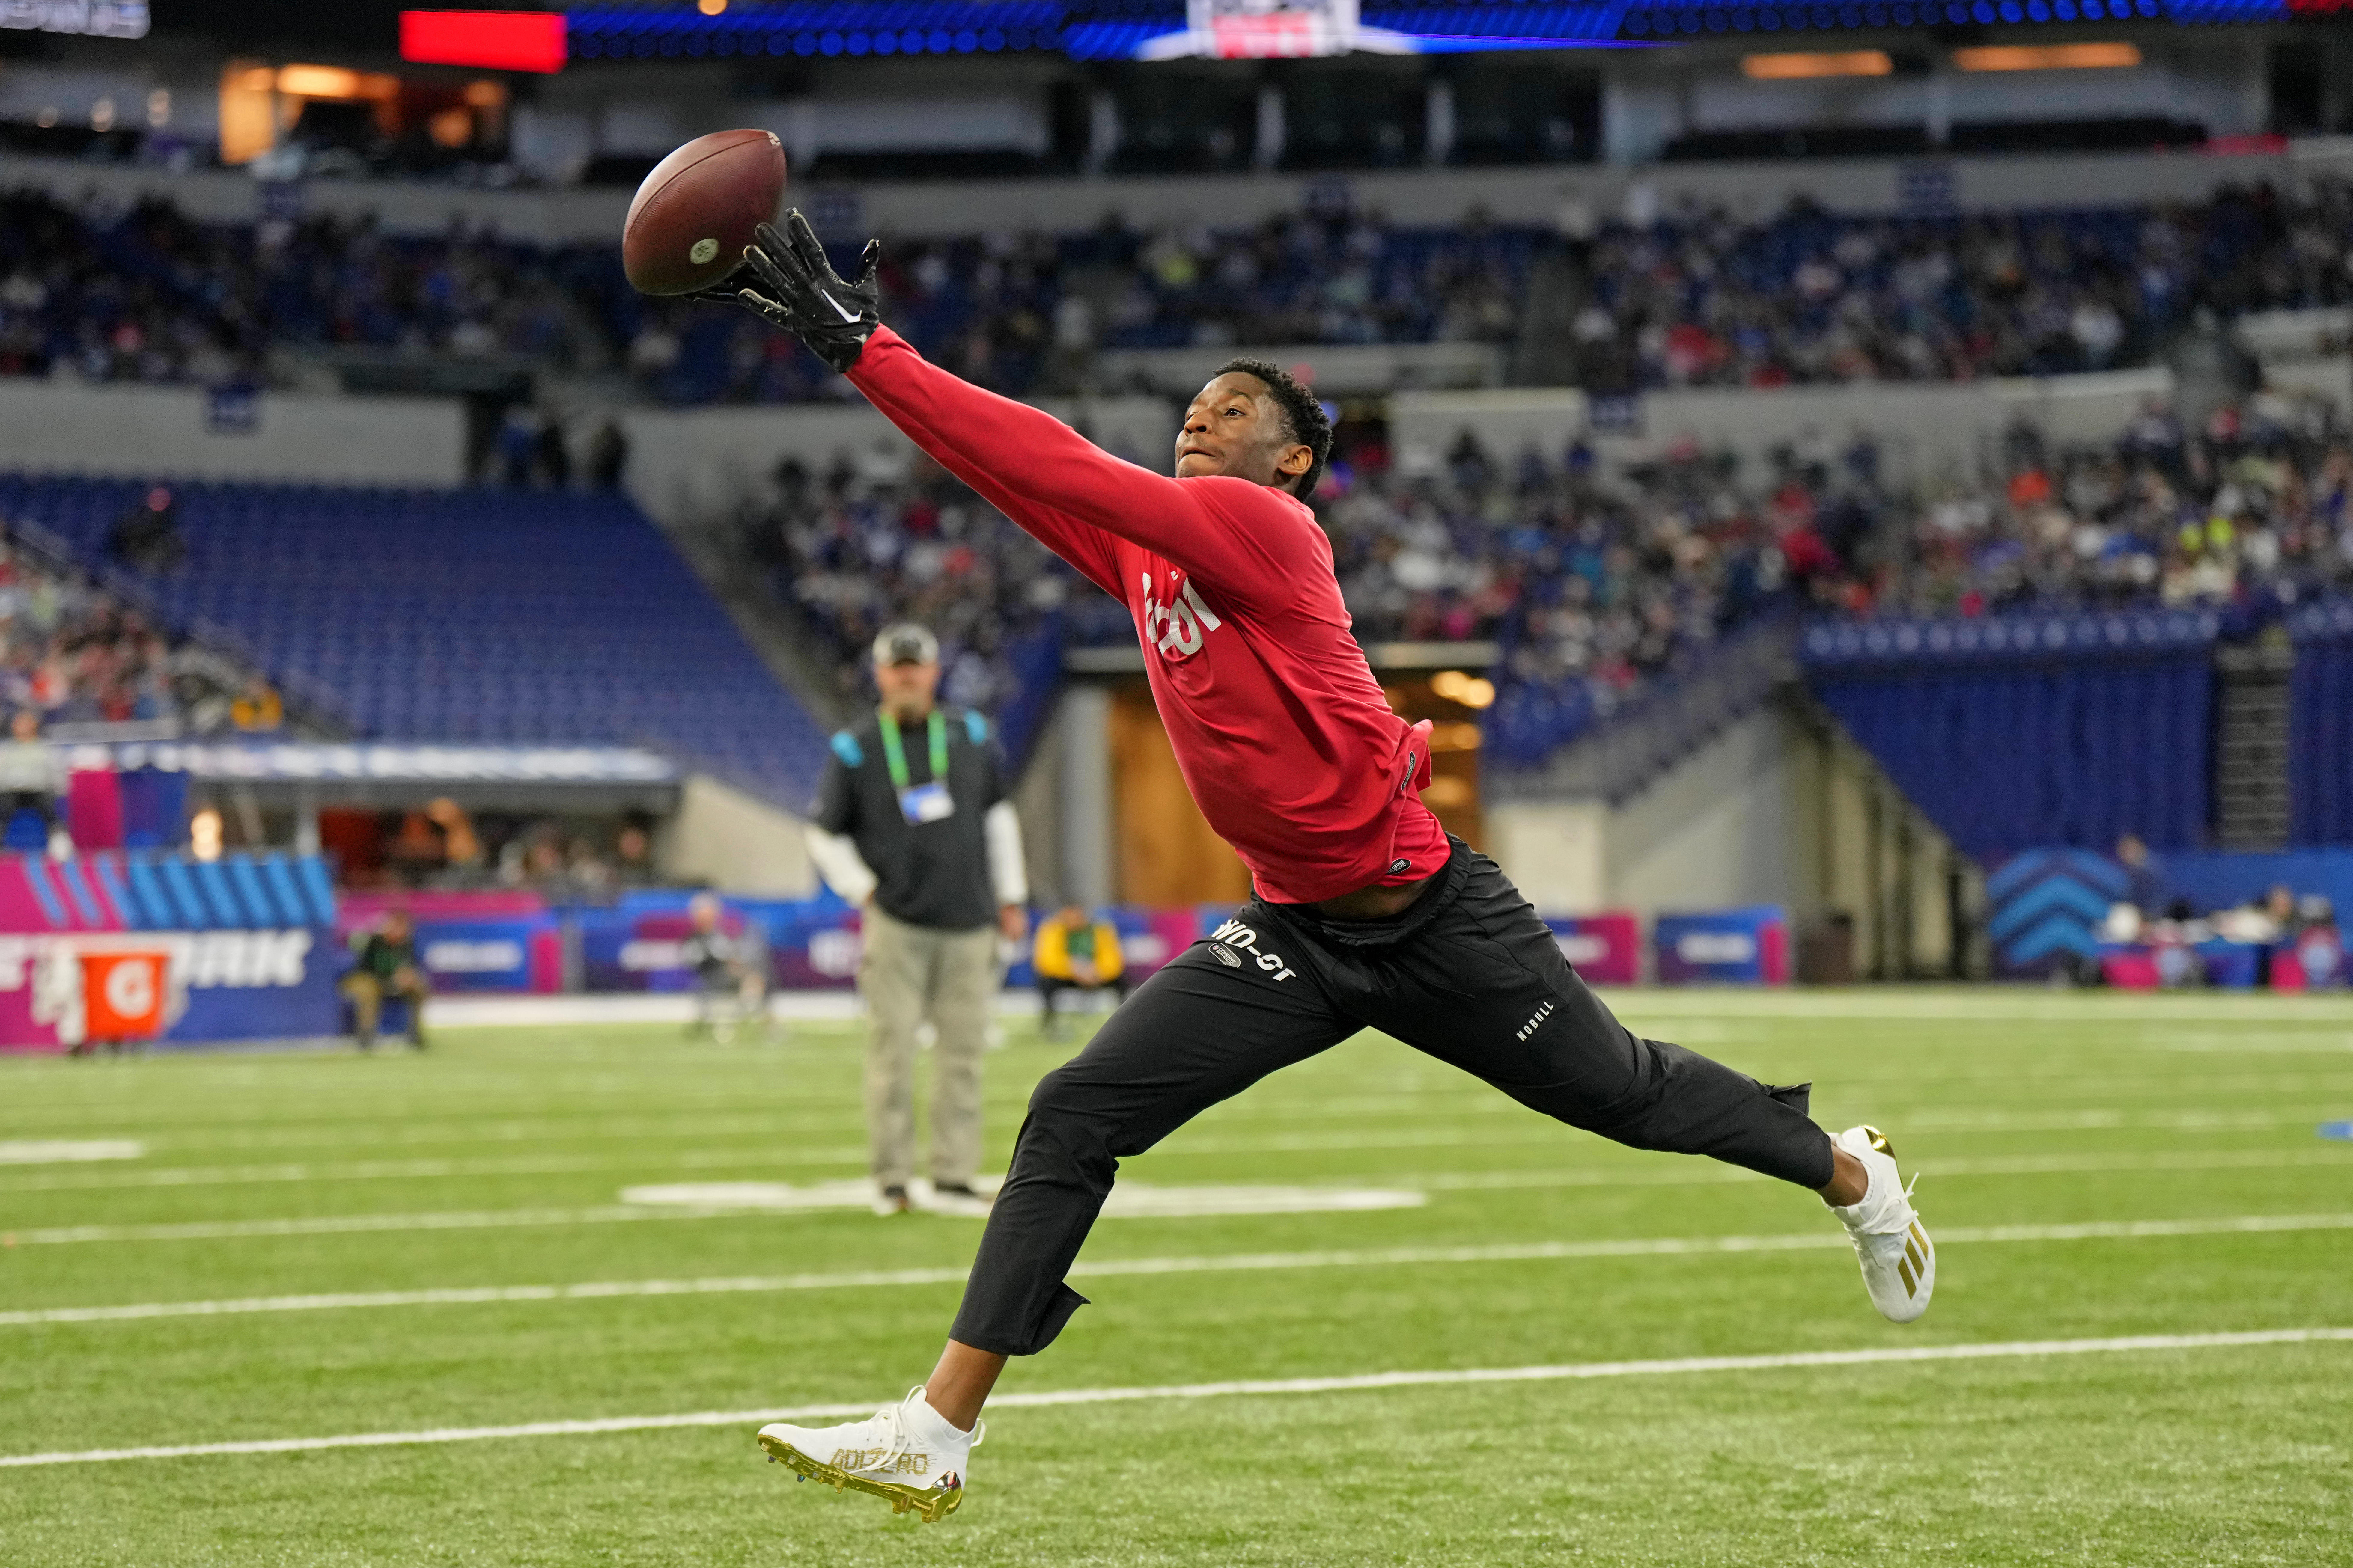 Texans’ No. 12 overall pick may come down between receiver and pass rusher